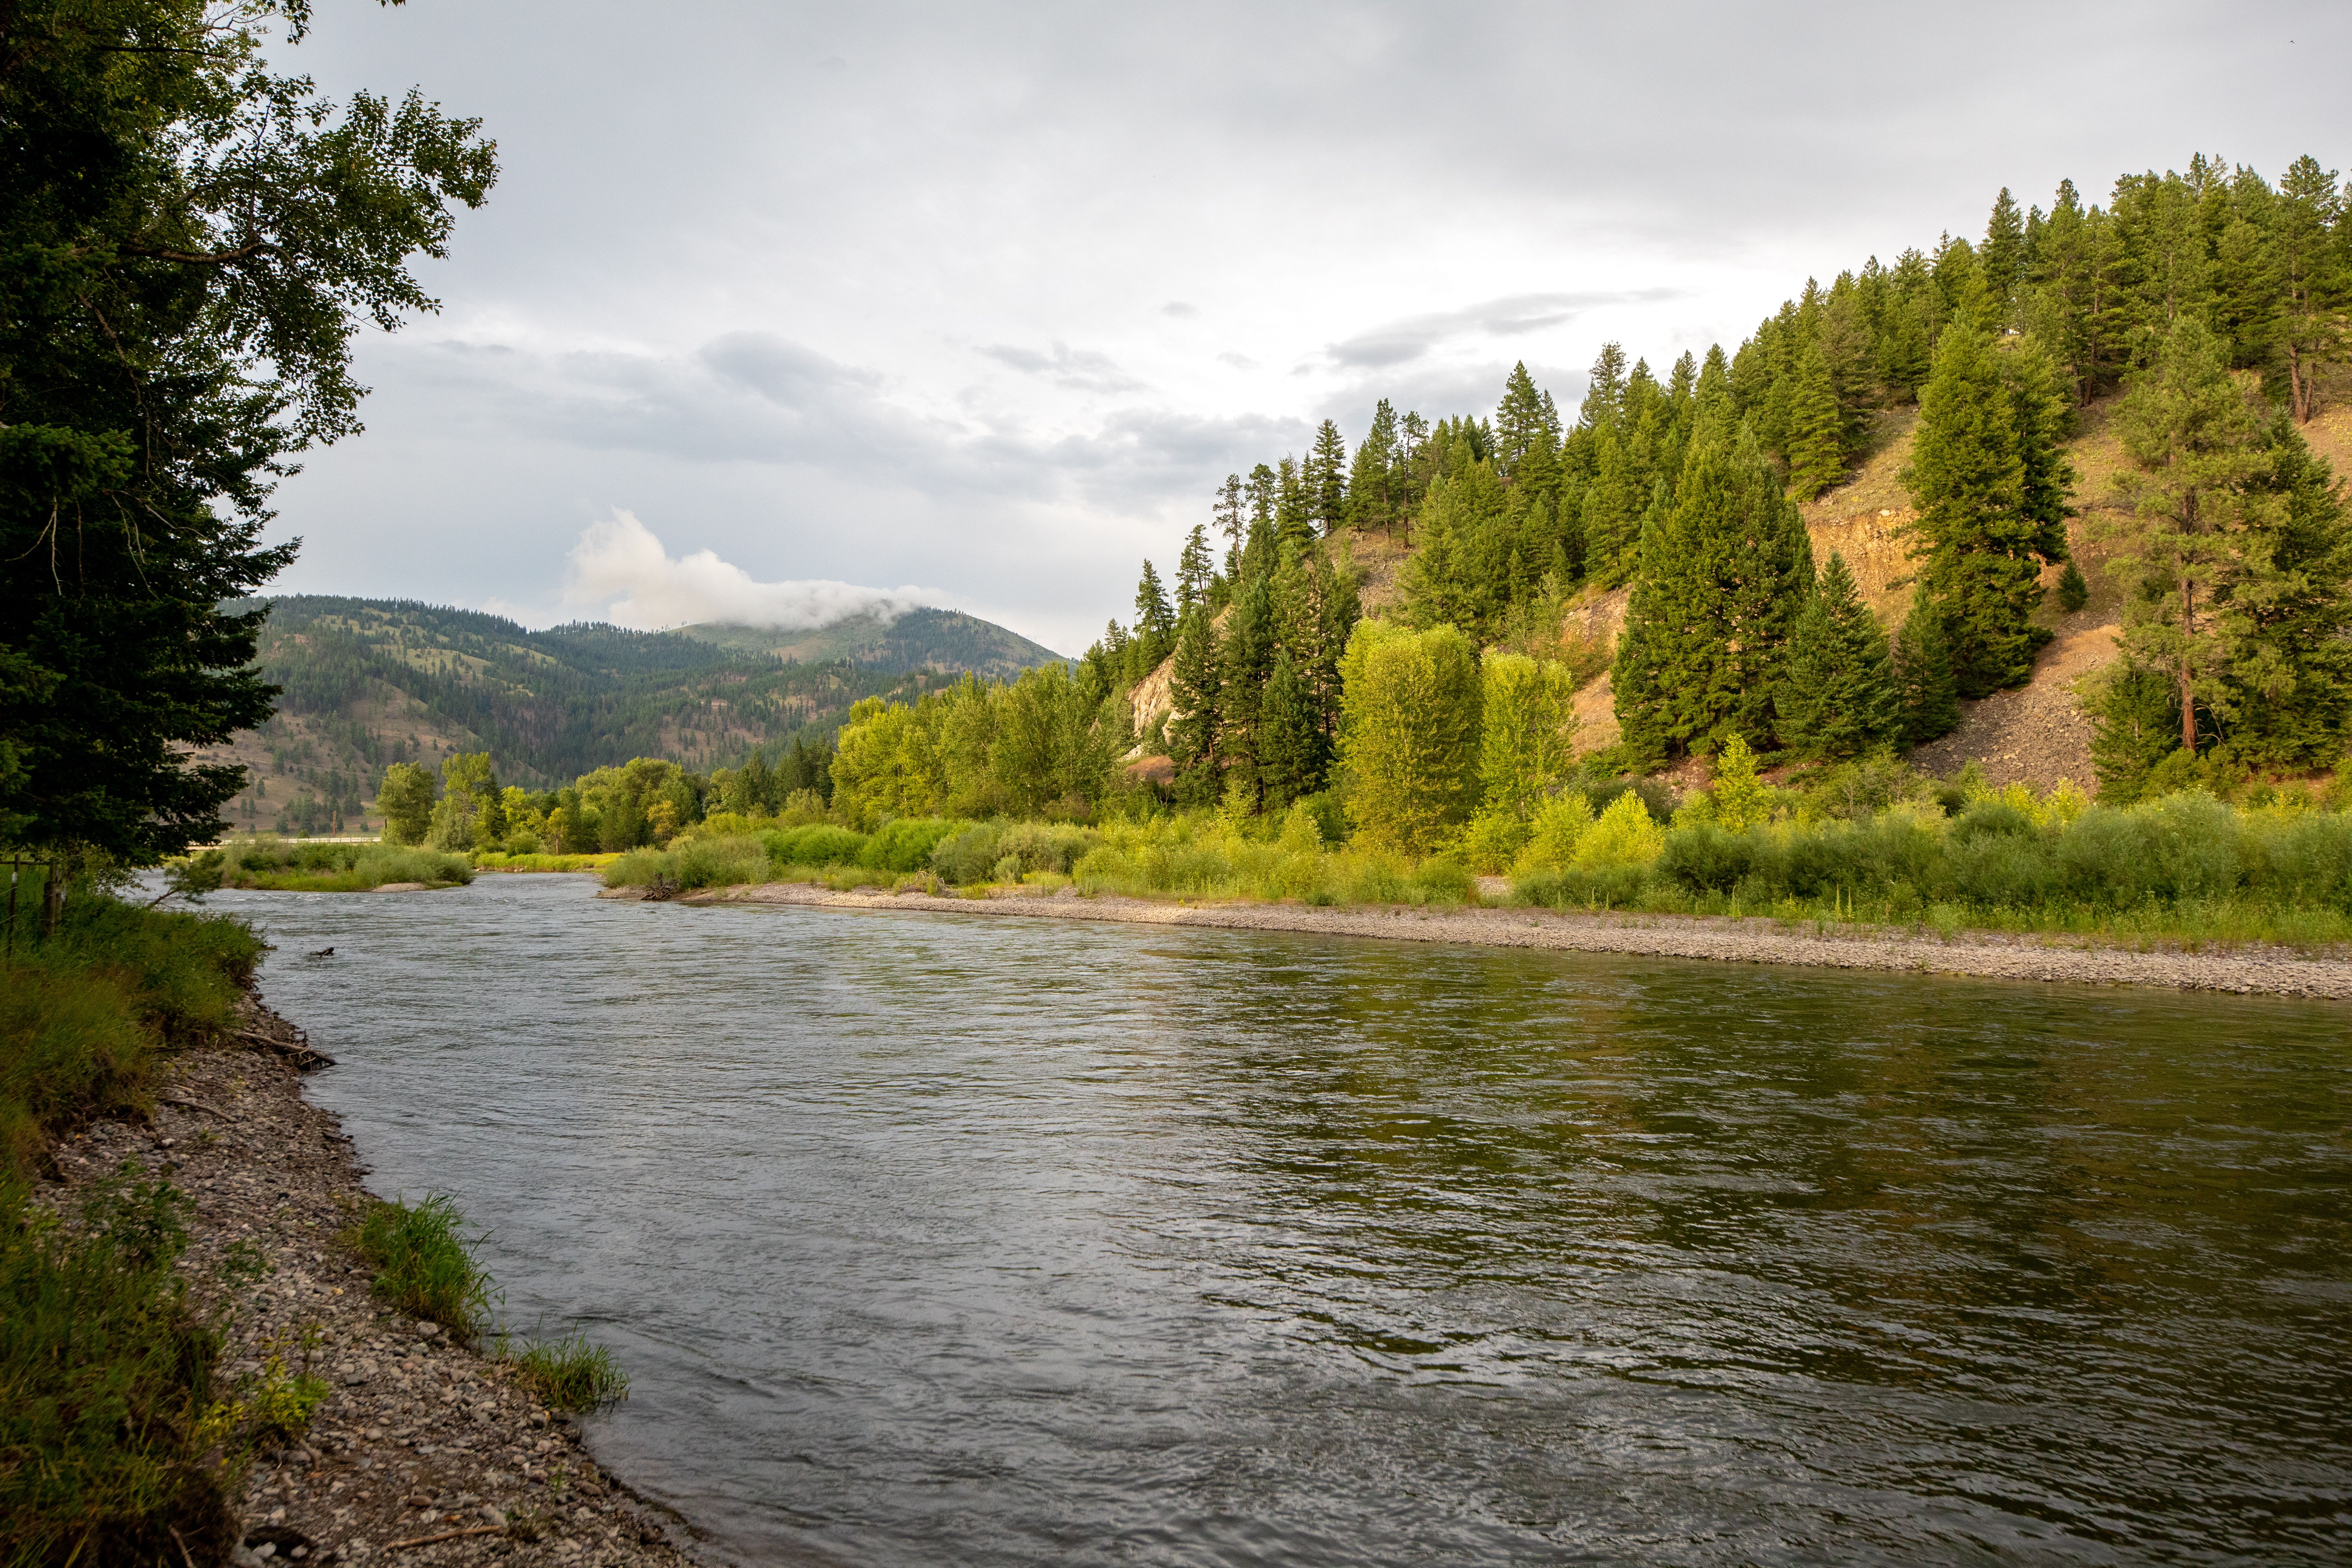 [Image Description: The Clark Fork river, surrounded by bright green shrubs, bushes, and trees. Clouds cover the sky and hide the tops of the mountains in the distance.]